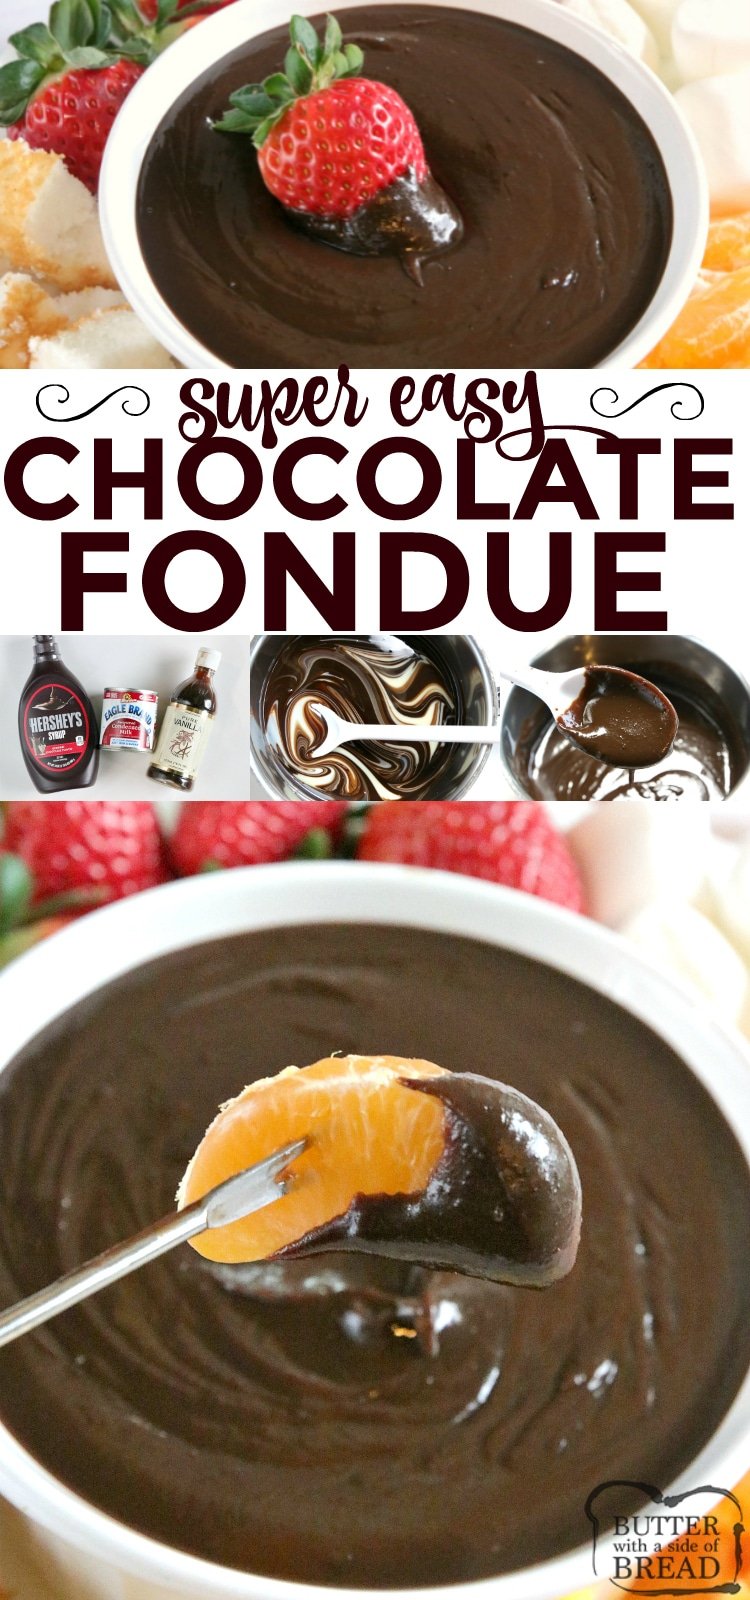 Easy Chocolate Fondue is made on the stove with only 3 ingredients and is the most delicious dessert for all occasions!